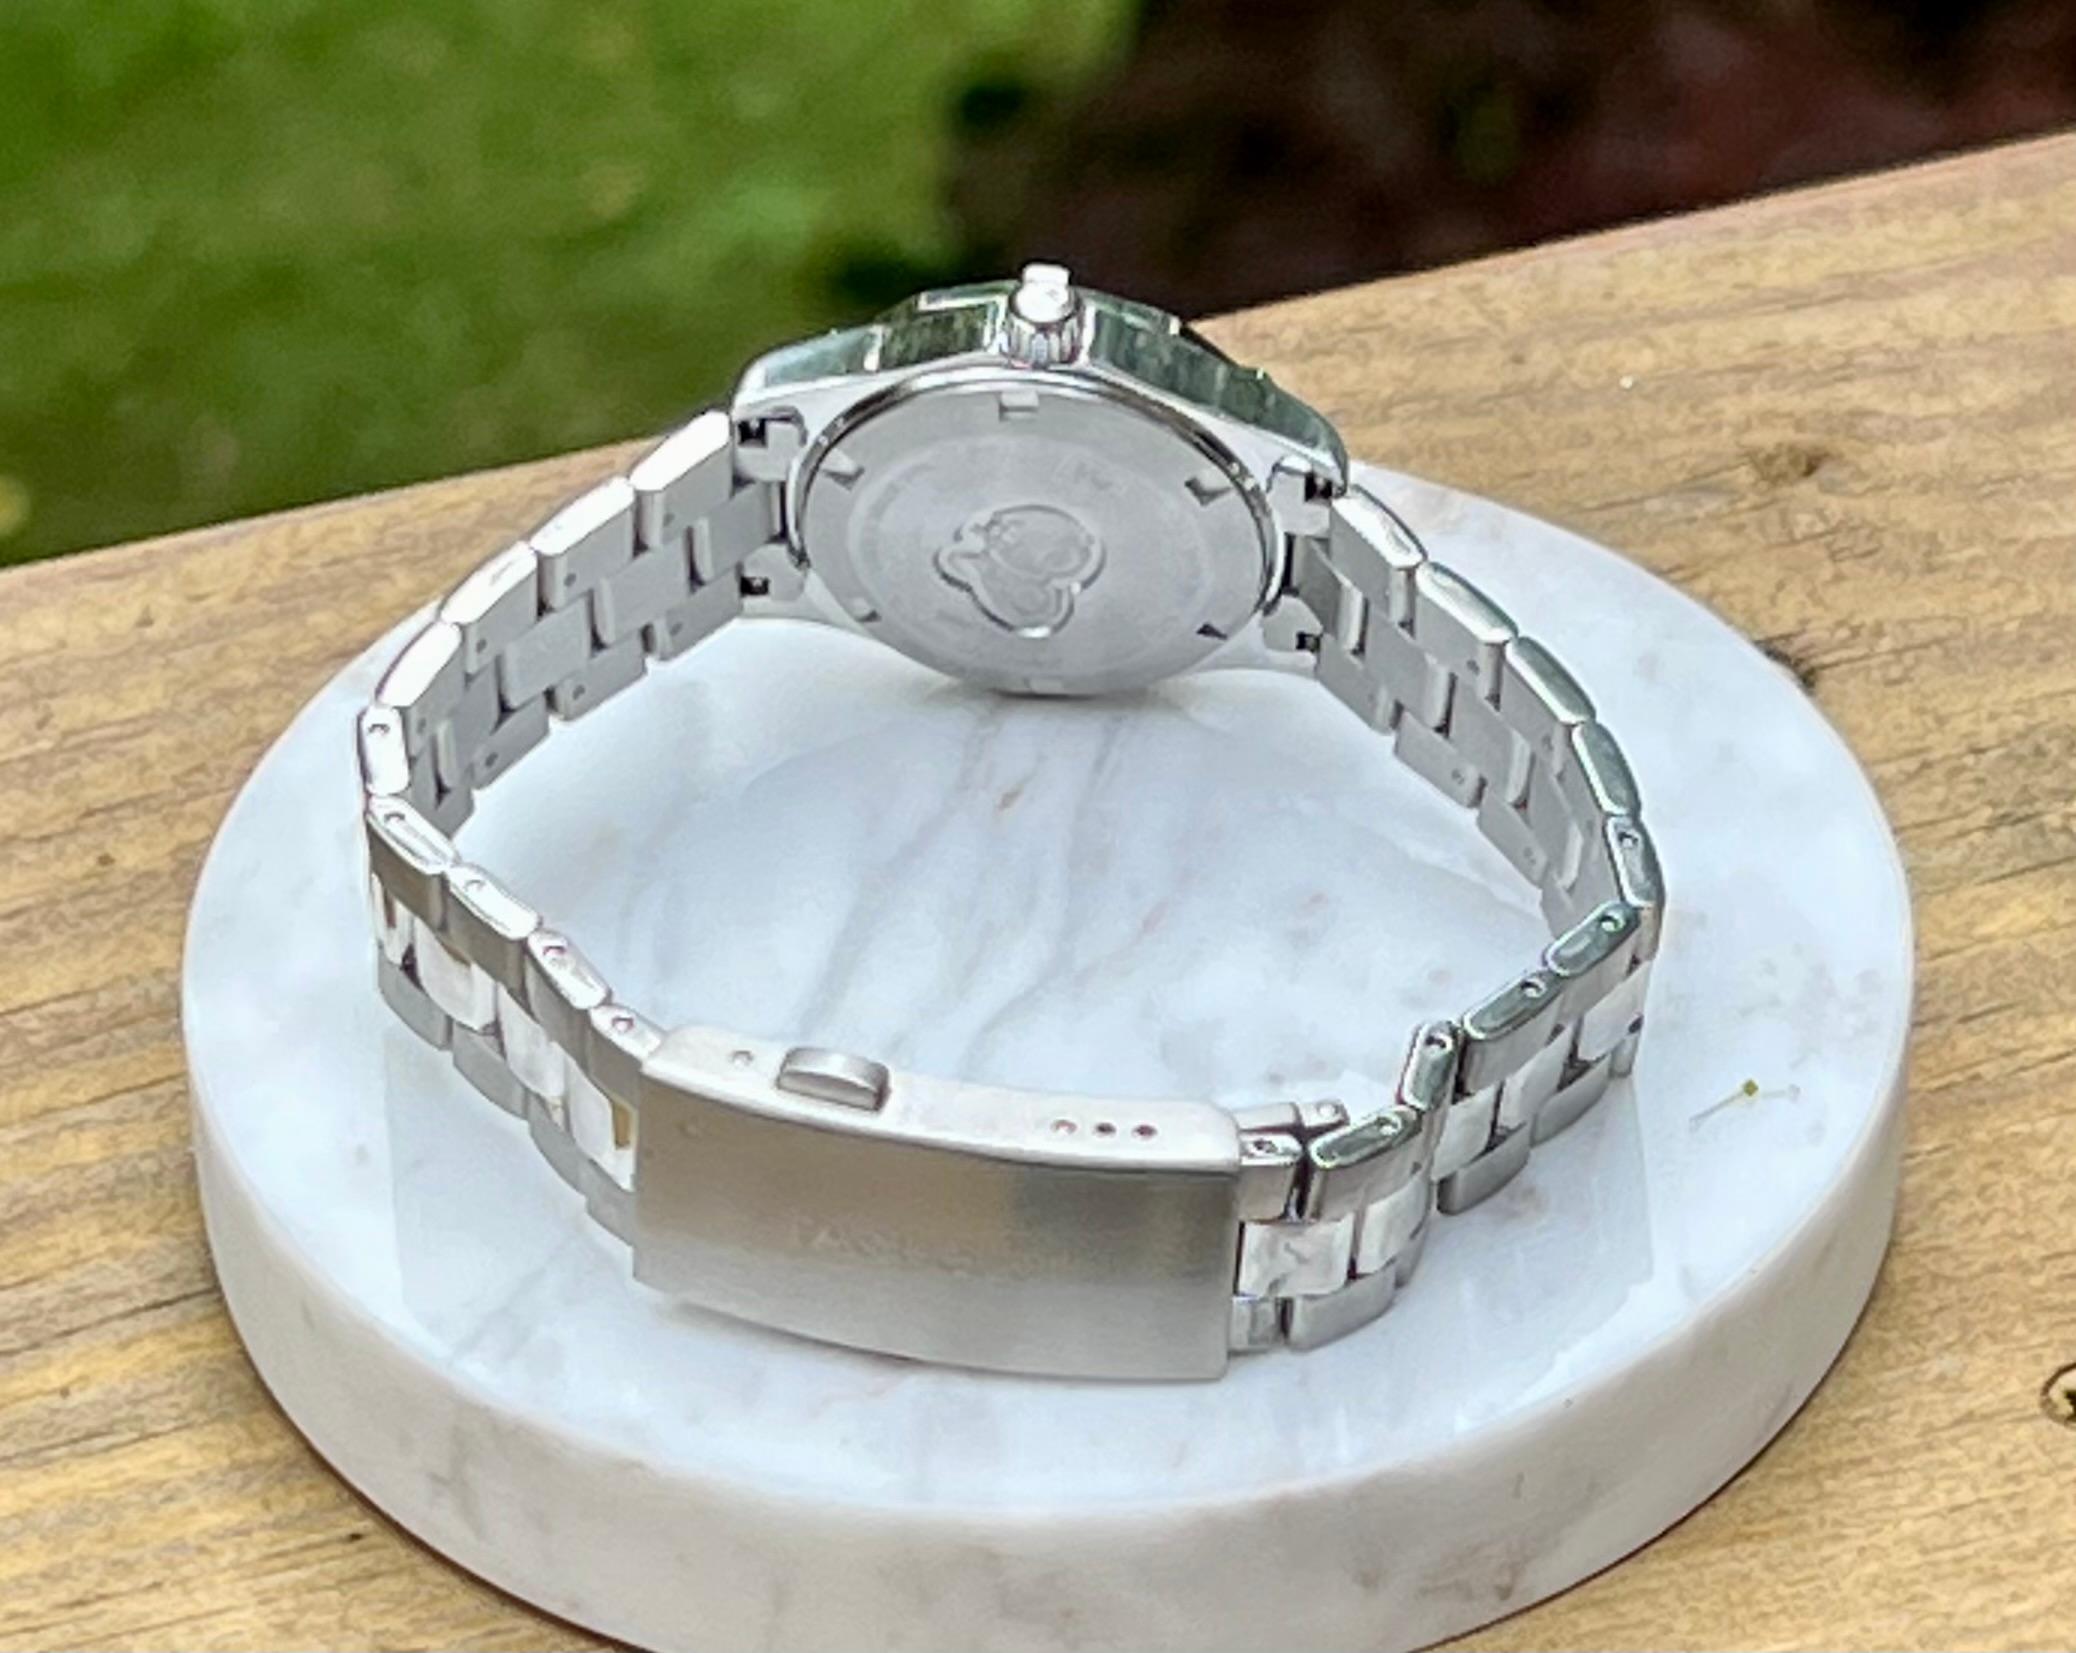 TAG Hauer Aquaracer Mother of Pearl Dial Women's Watch WAF1417 RBL2874 In Good Condition In Towson, MD